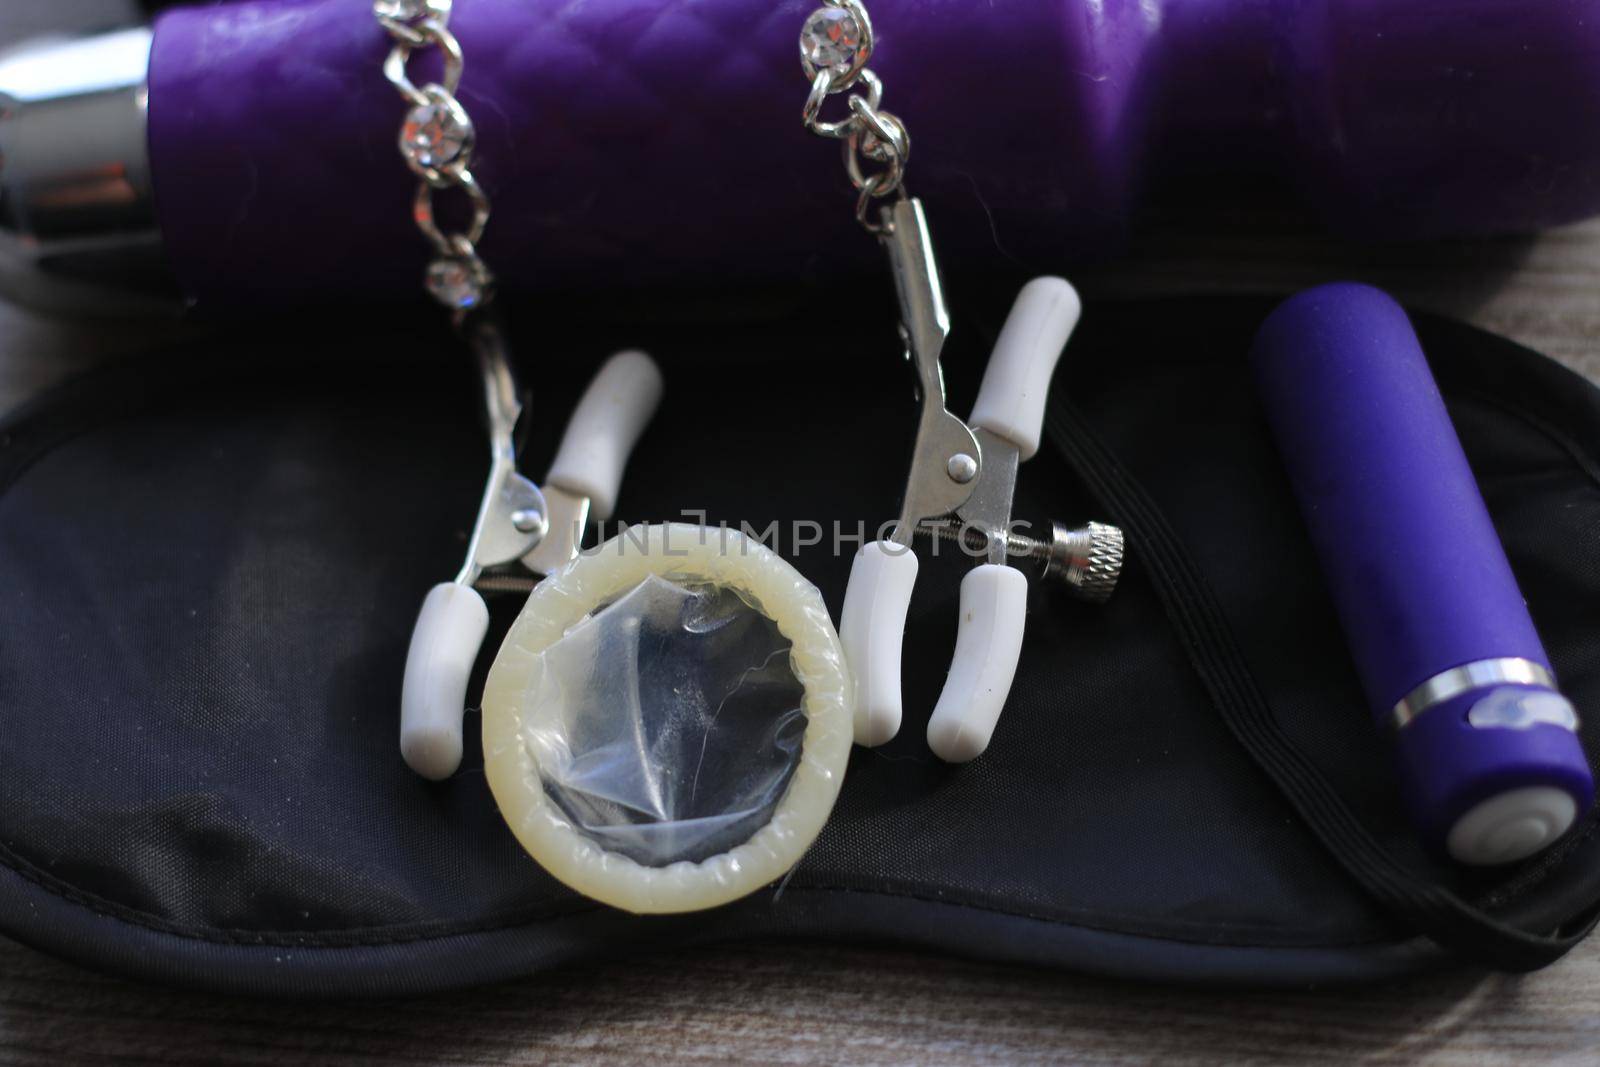 BDSM themed images showing a large dildo, nipple clamps, restraints, eye covers, and a condom. High quality photo